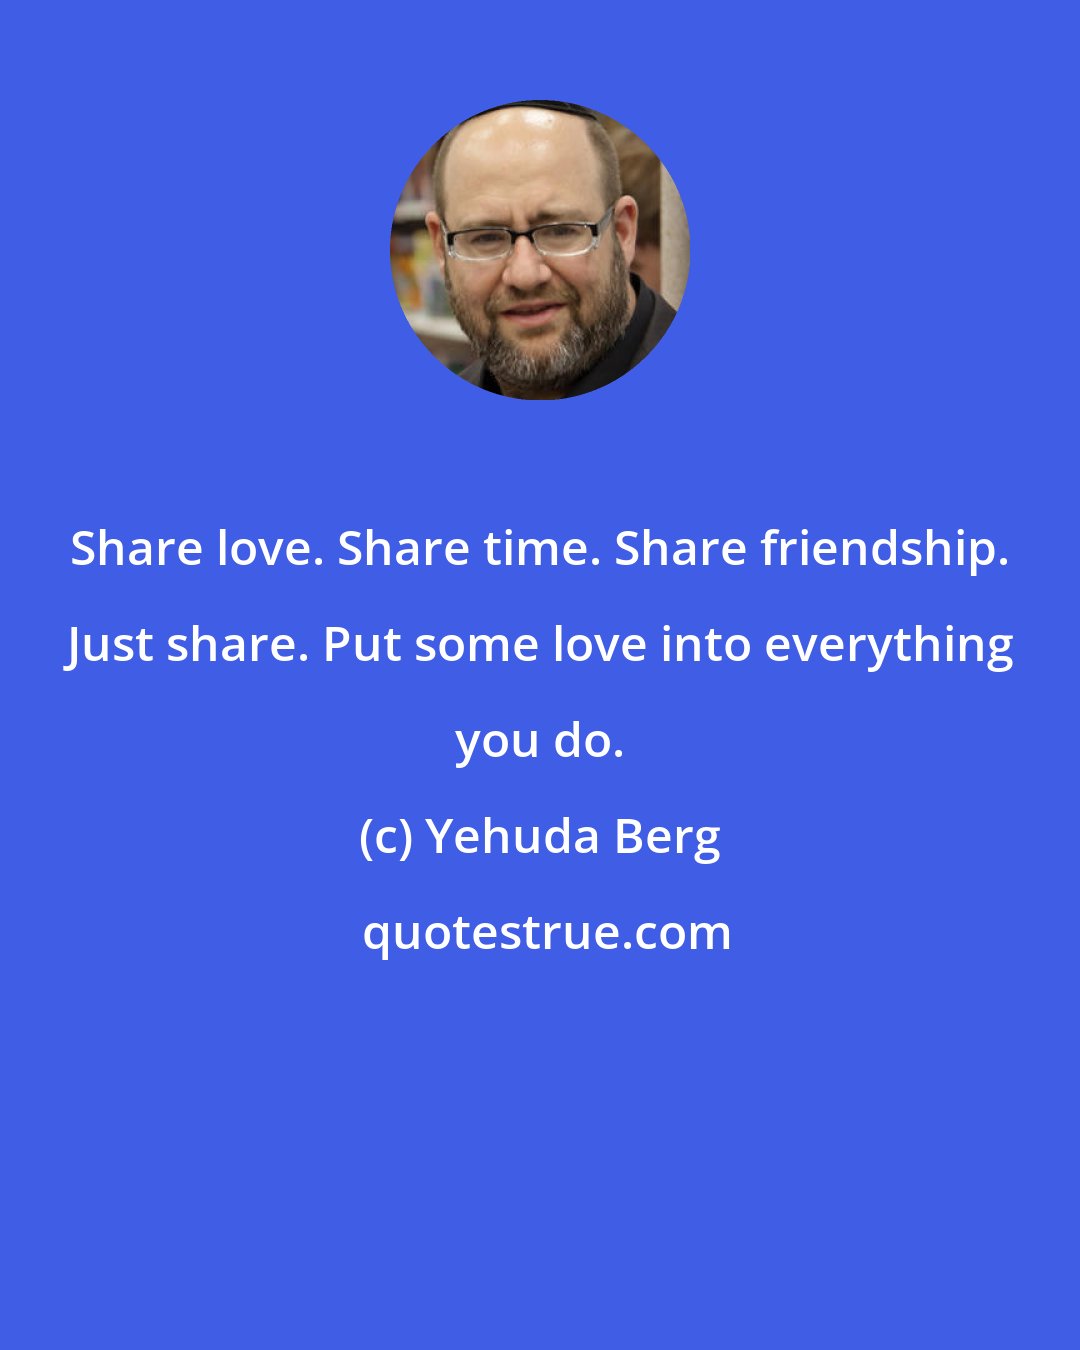 Yehuda Berg: Share love. Share time. Share friendship. Just share. Put some love into everything you do.